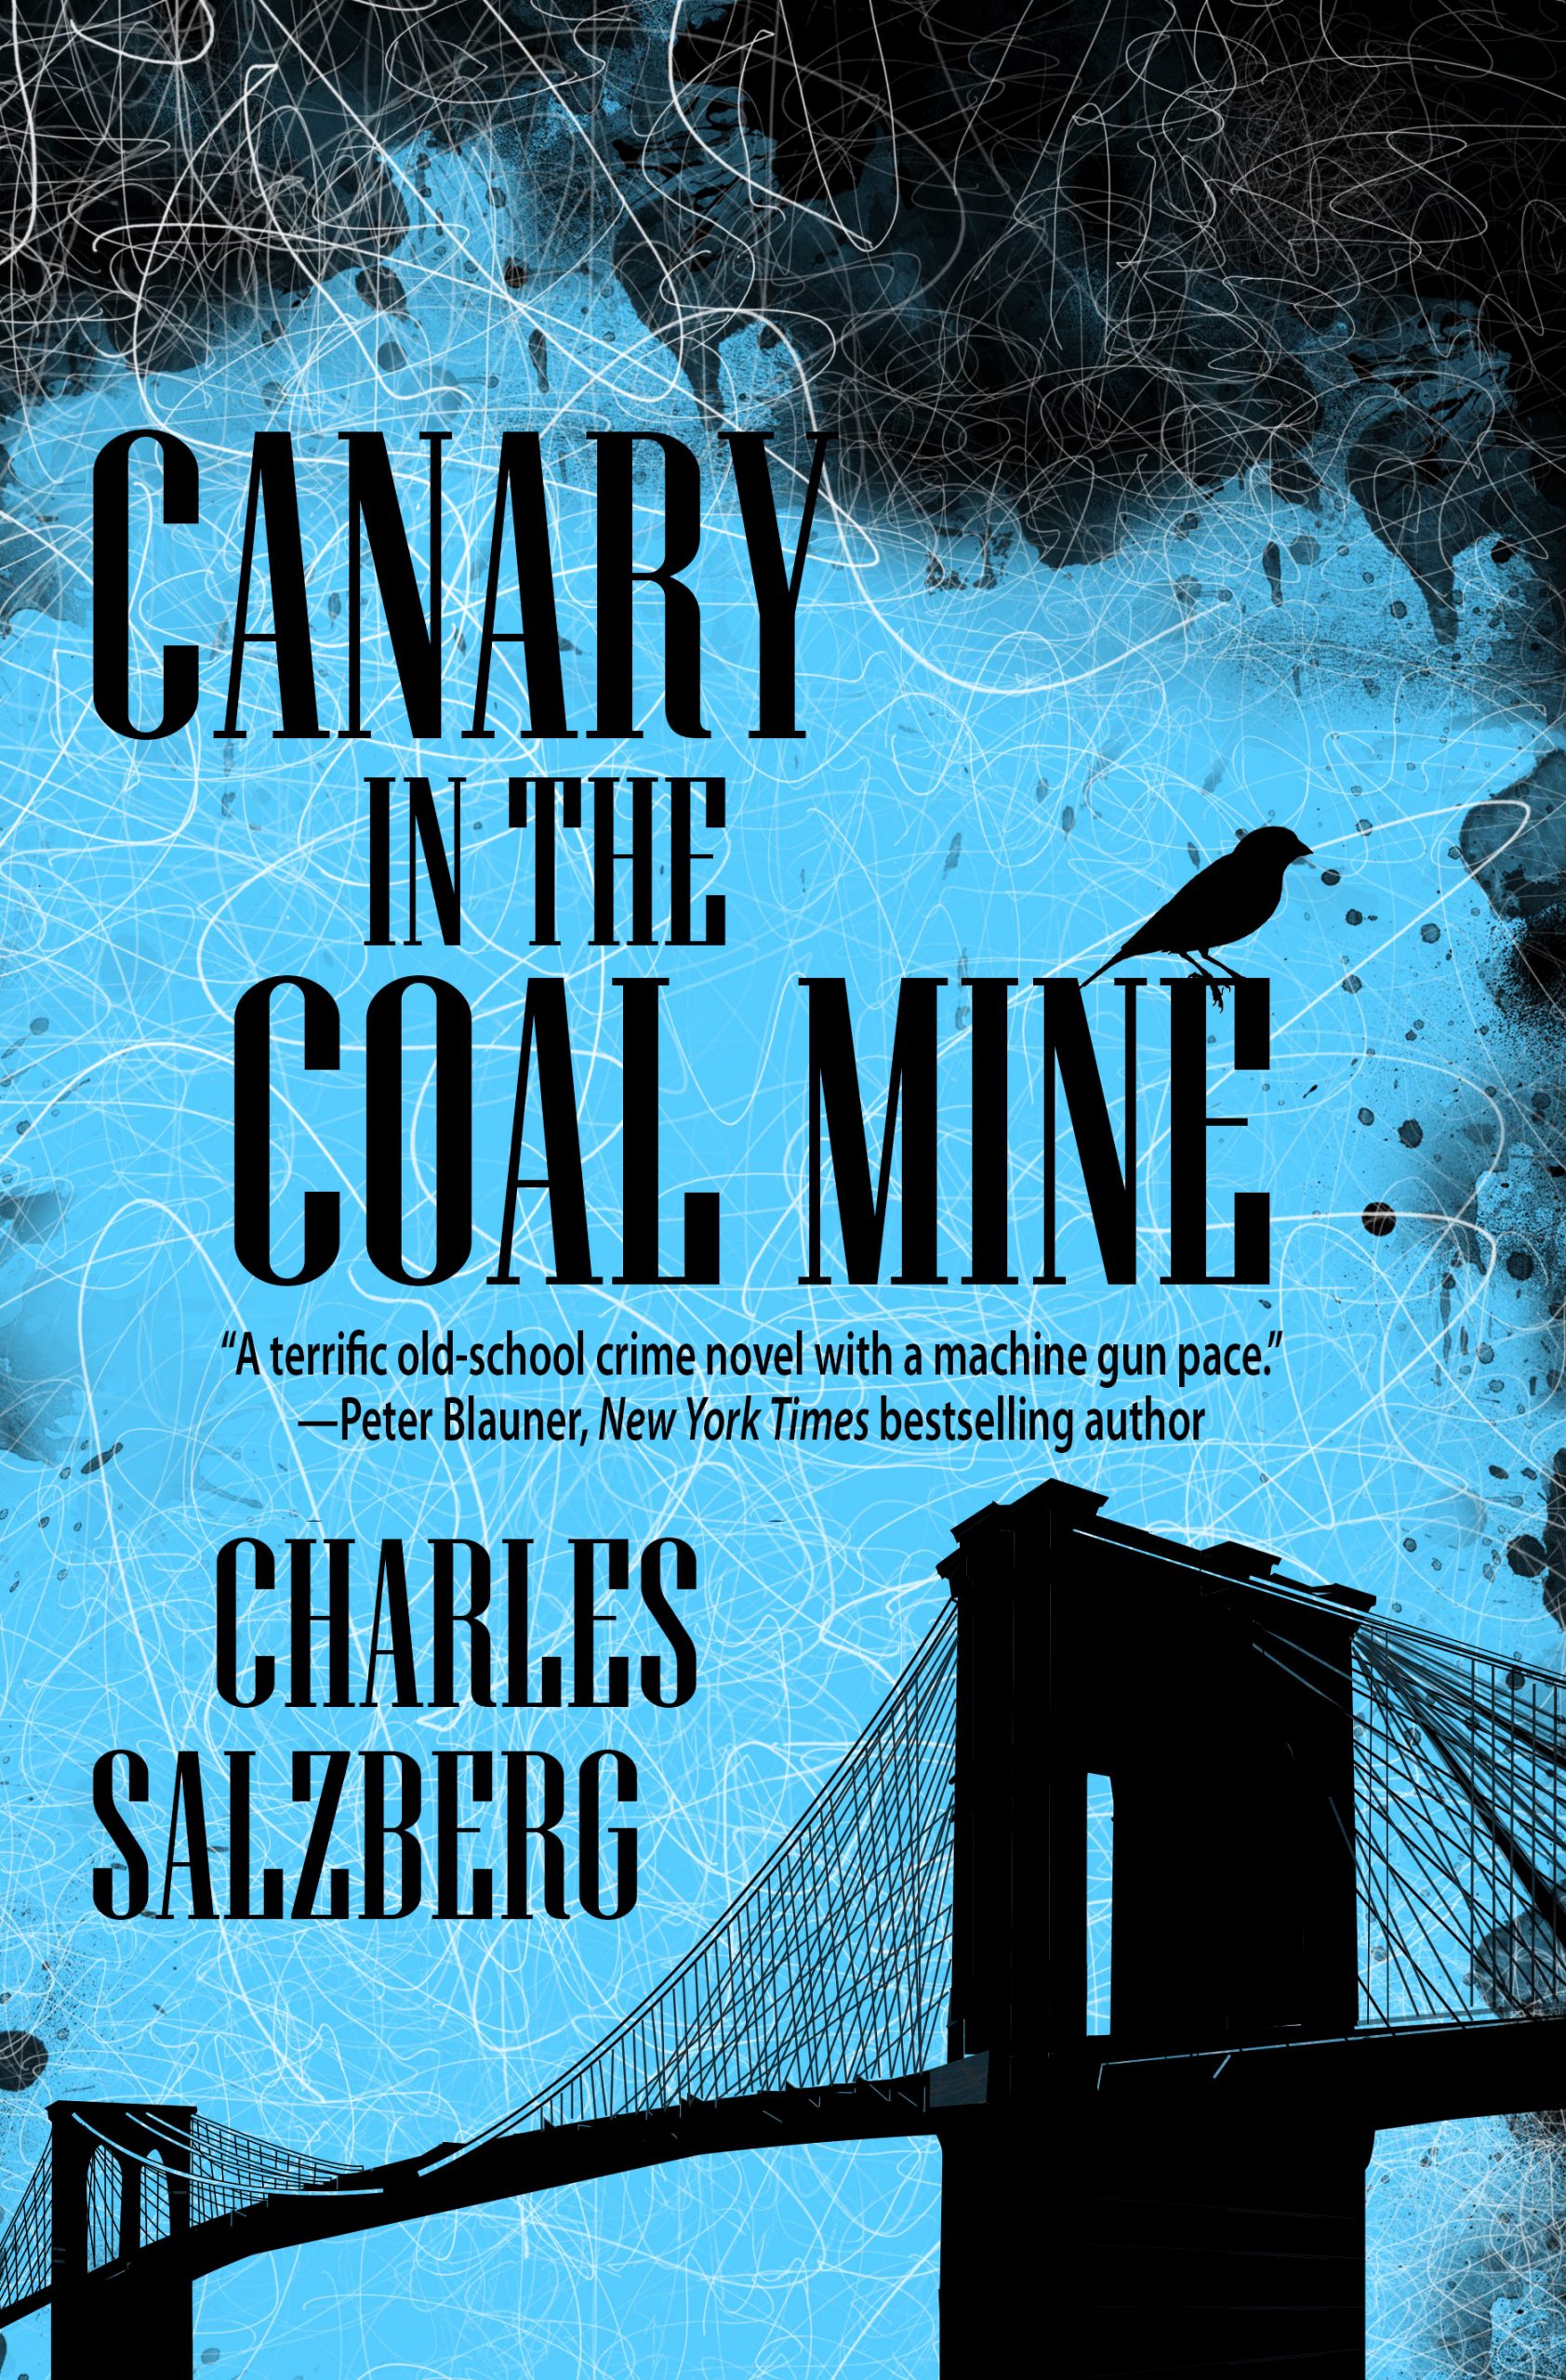 Canary In the Coal Mine by Charles Salzberg